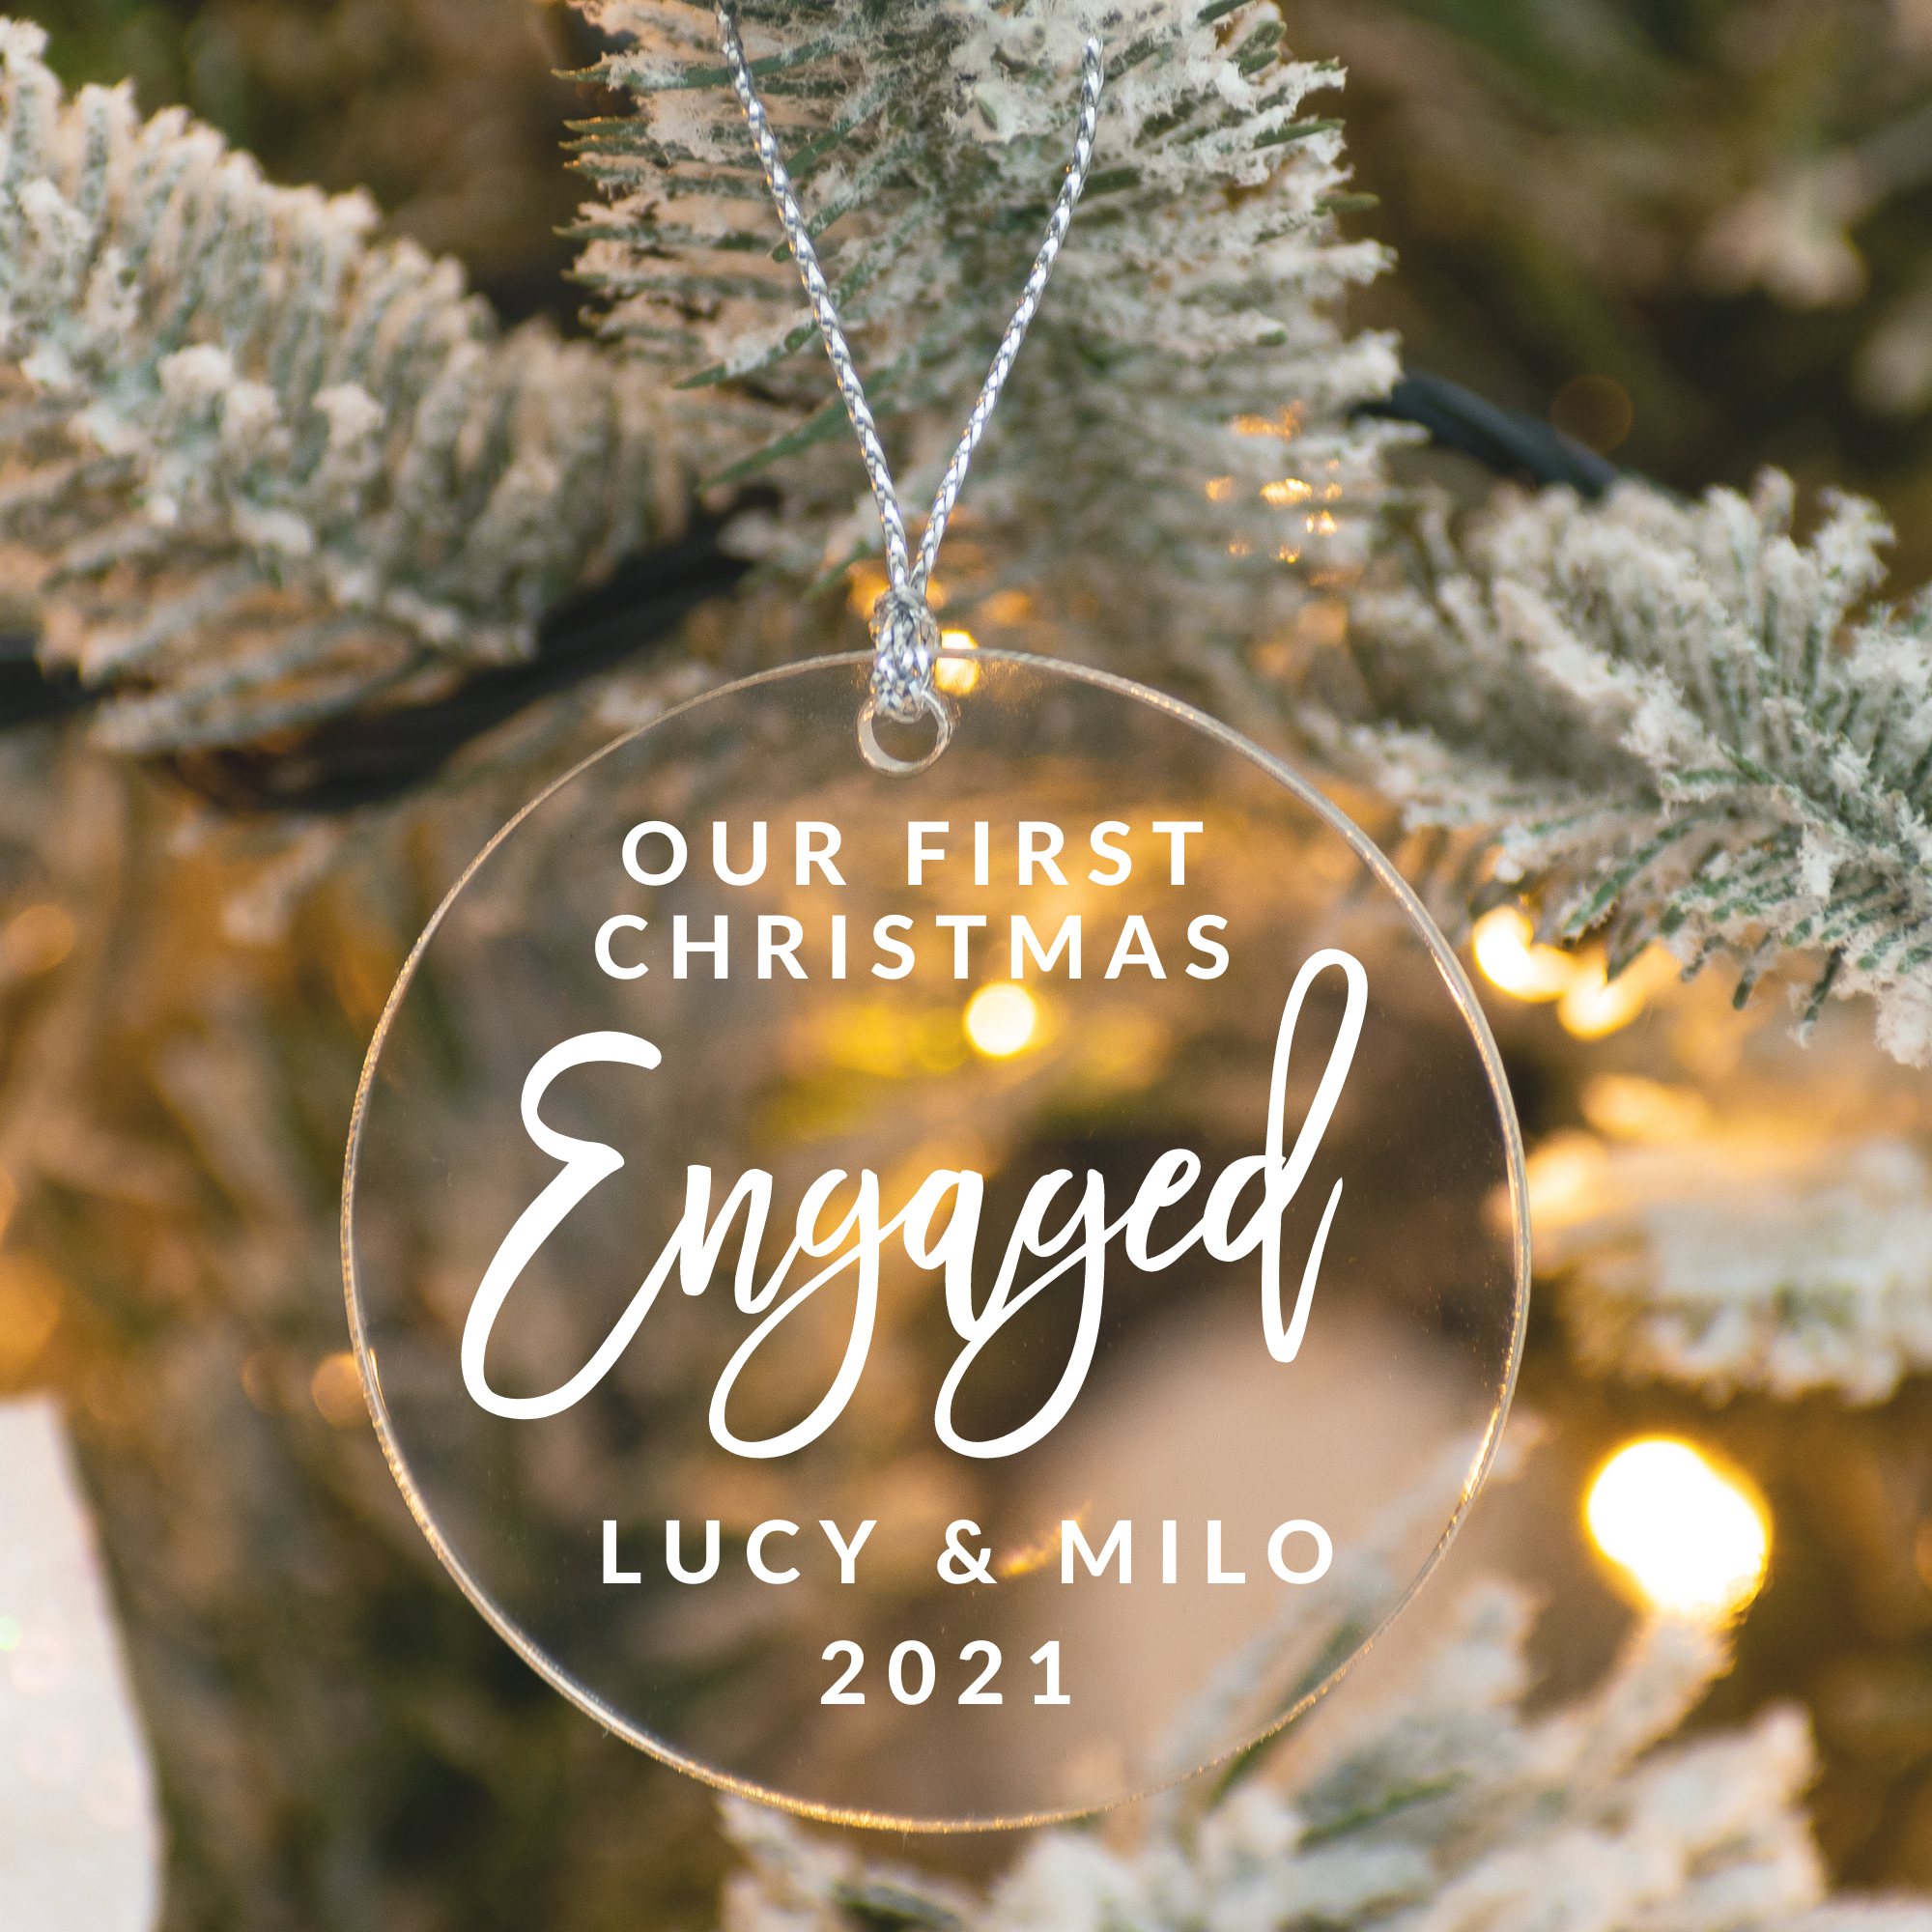 Clear flat ornament with white font that says "Our First Christmas Engaged Lucy & Milo 2021".